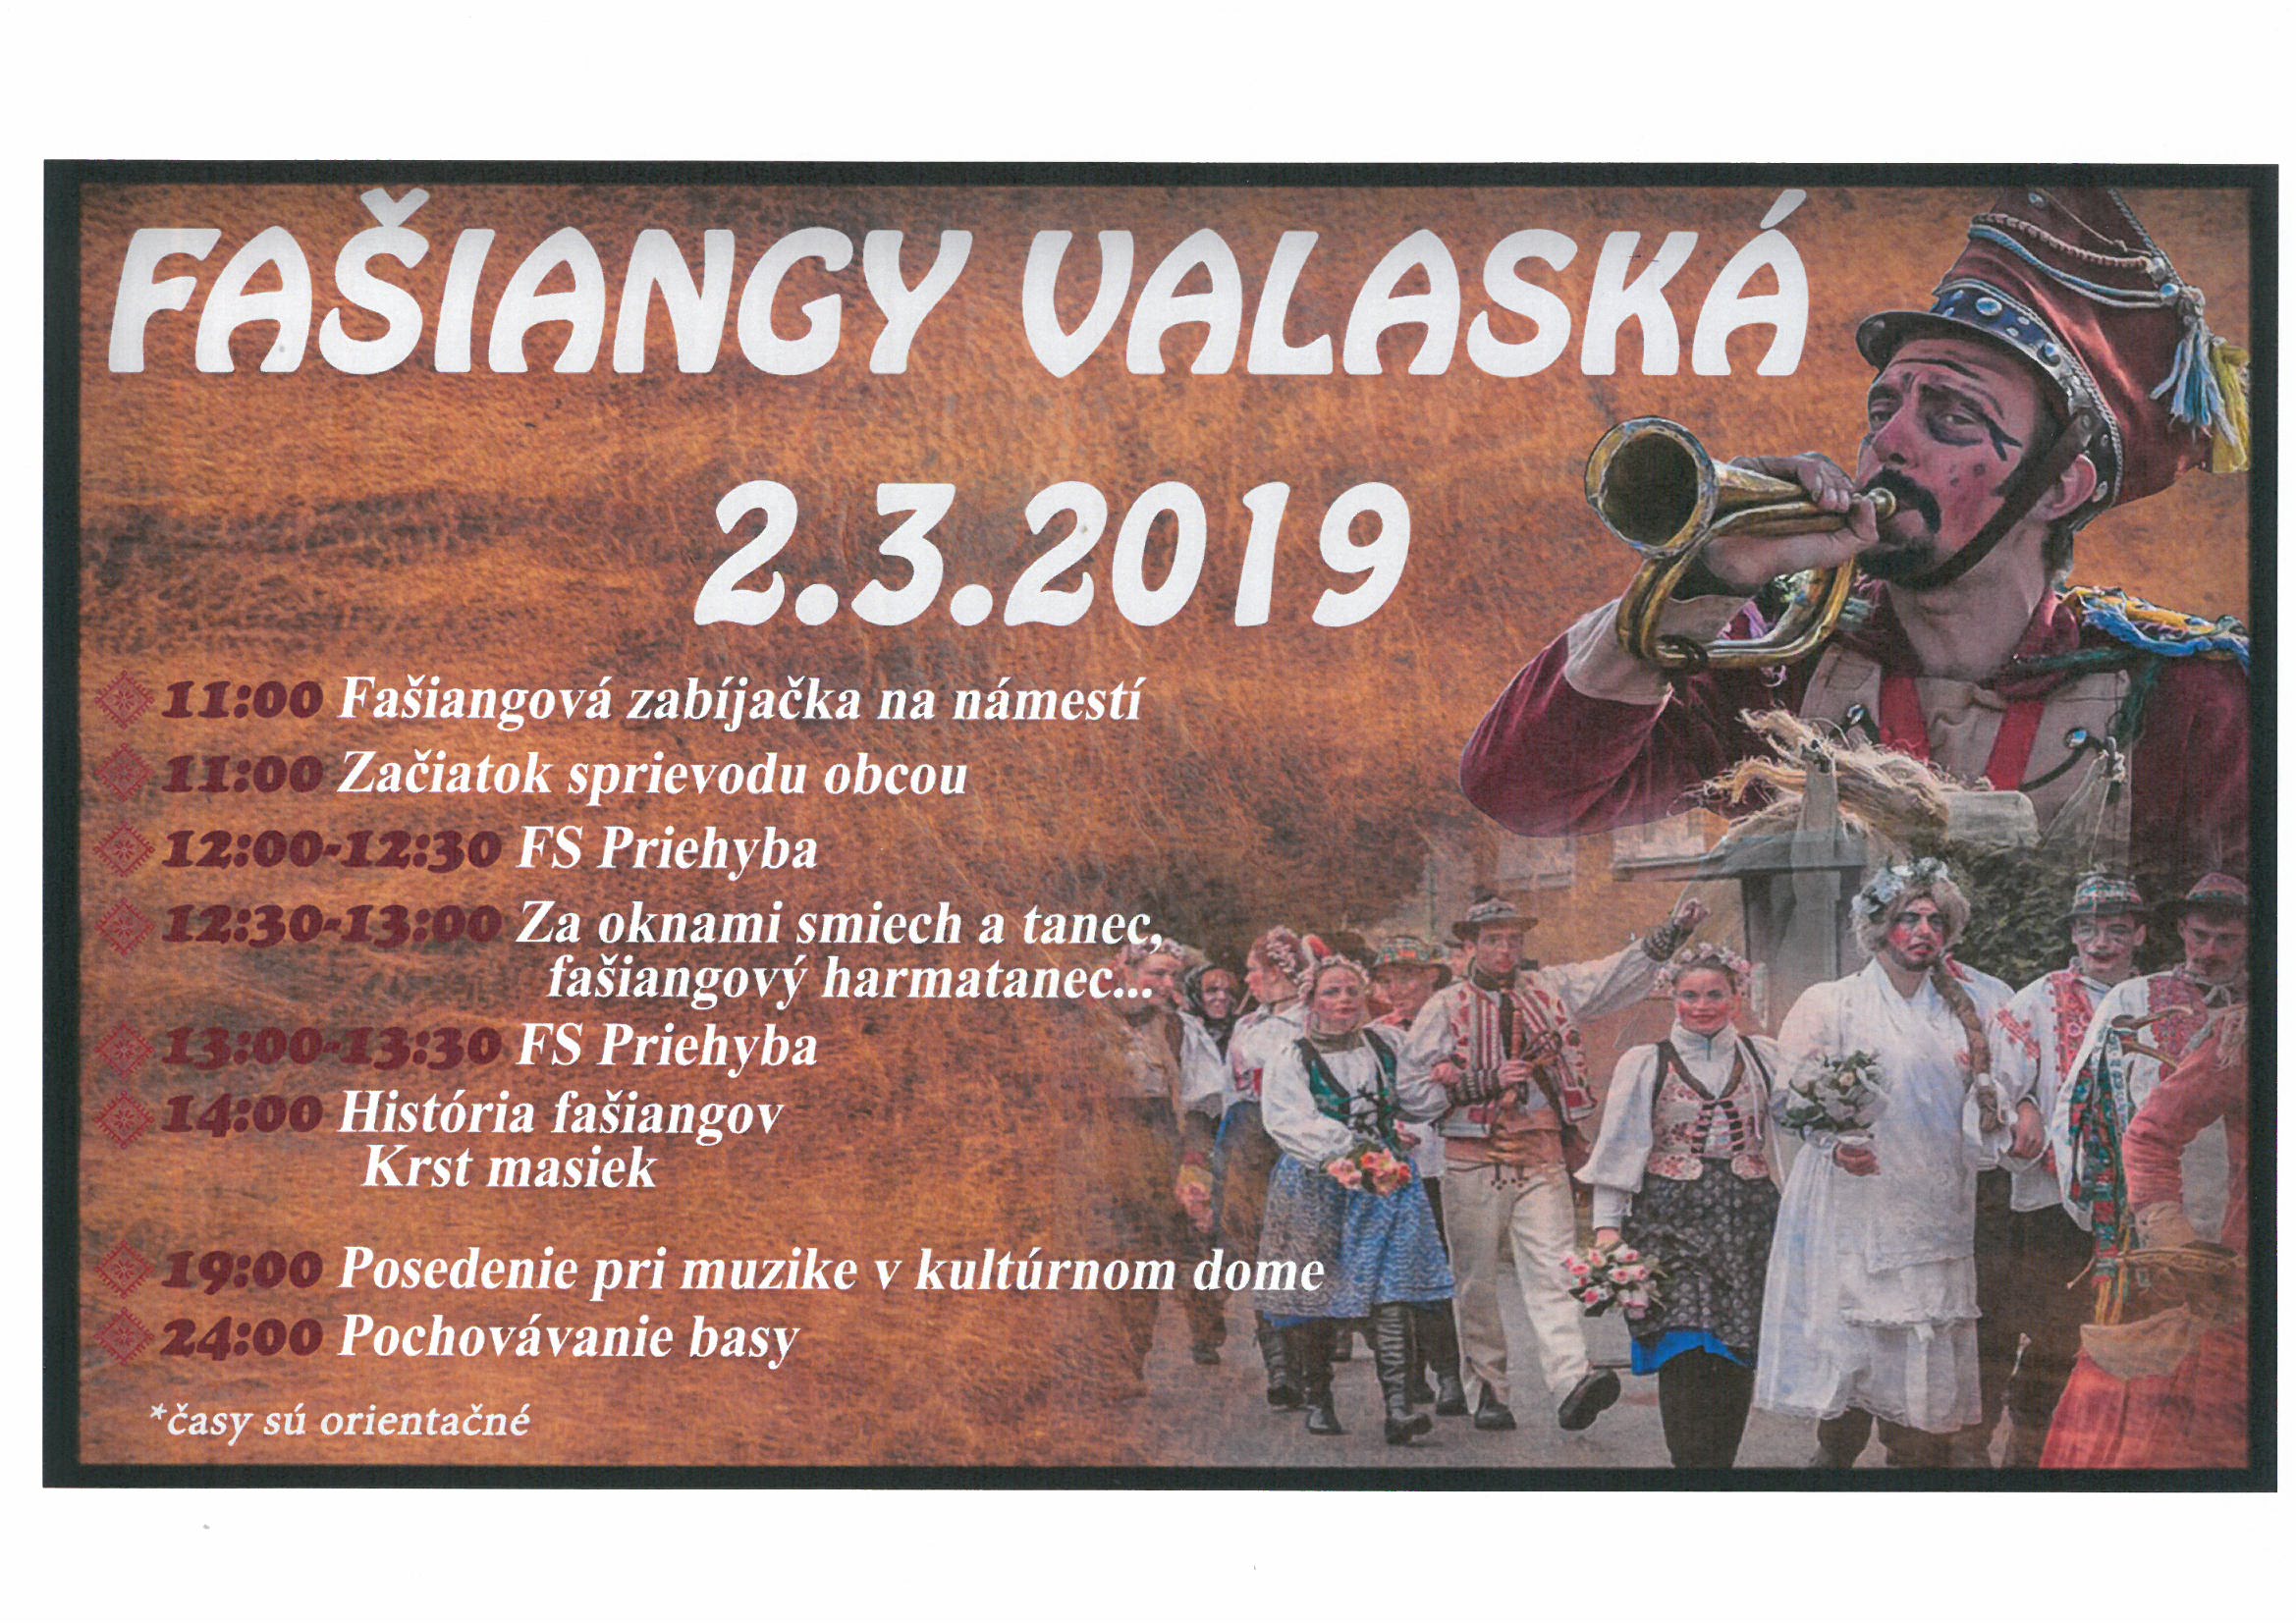 Faiangy Valask 2019